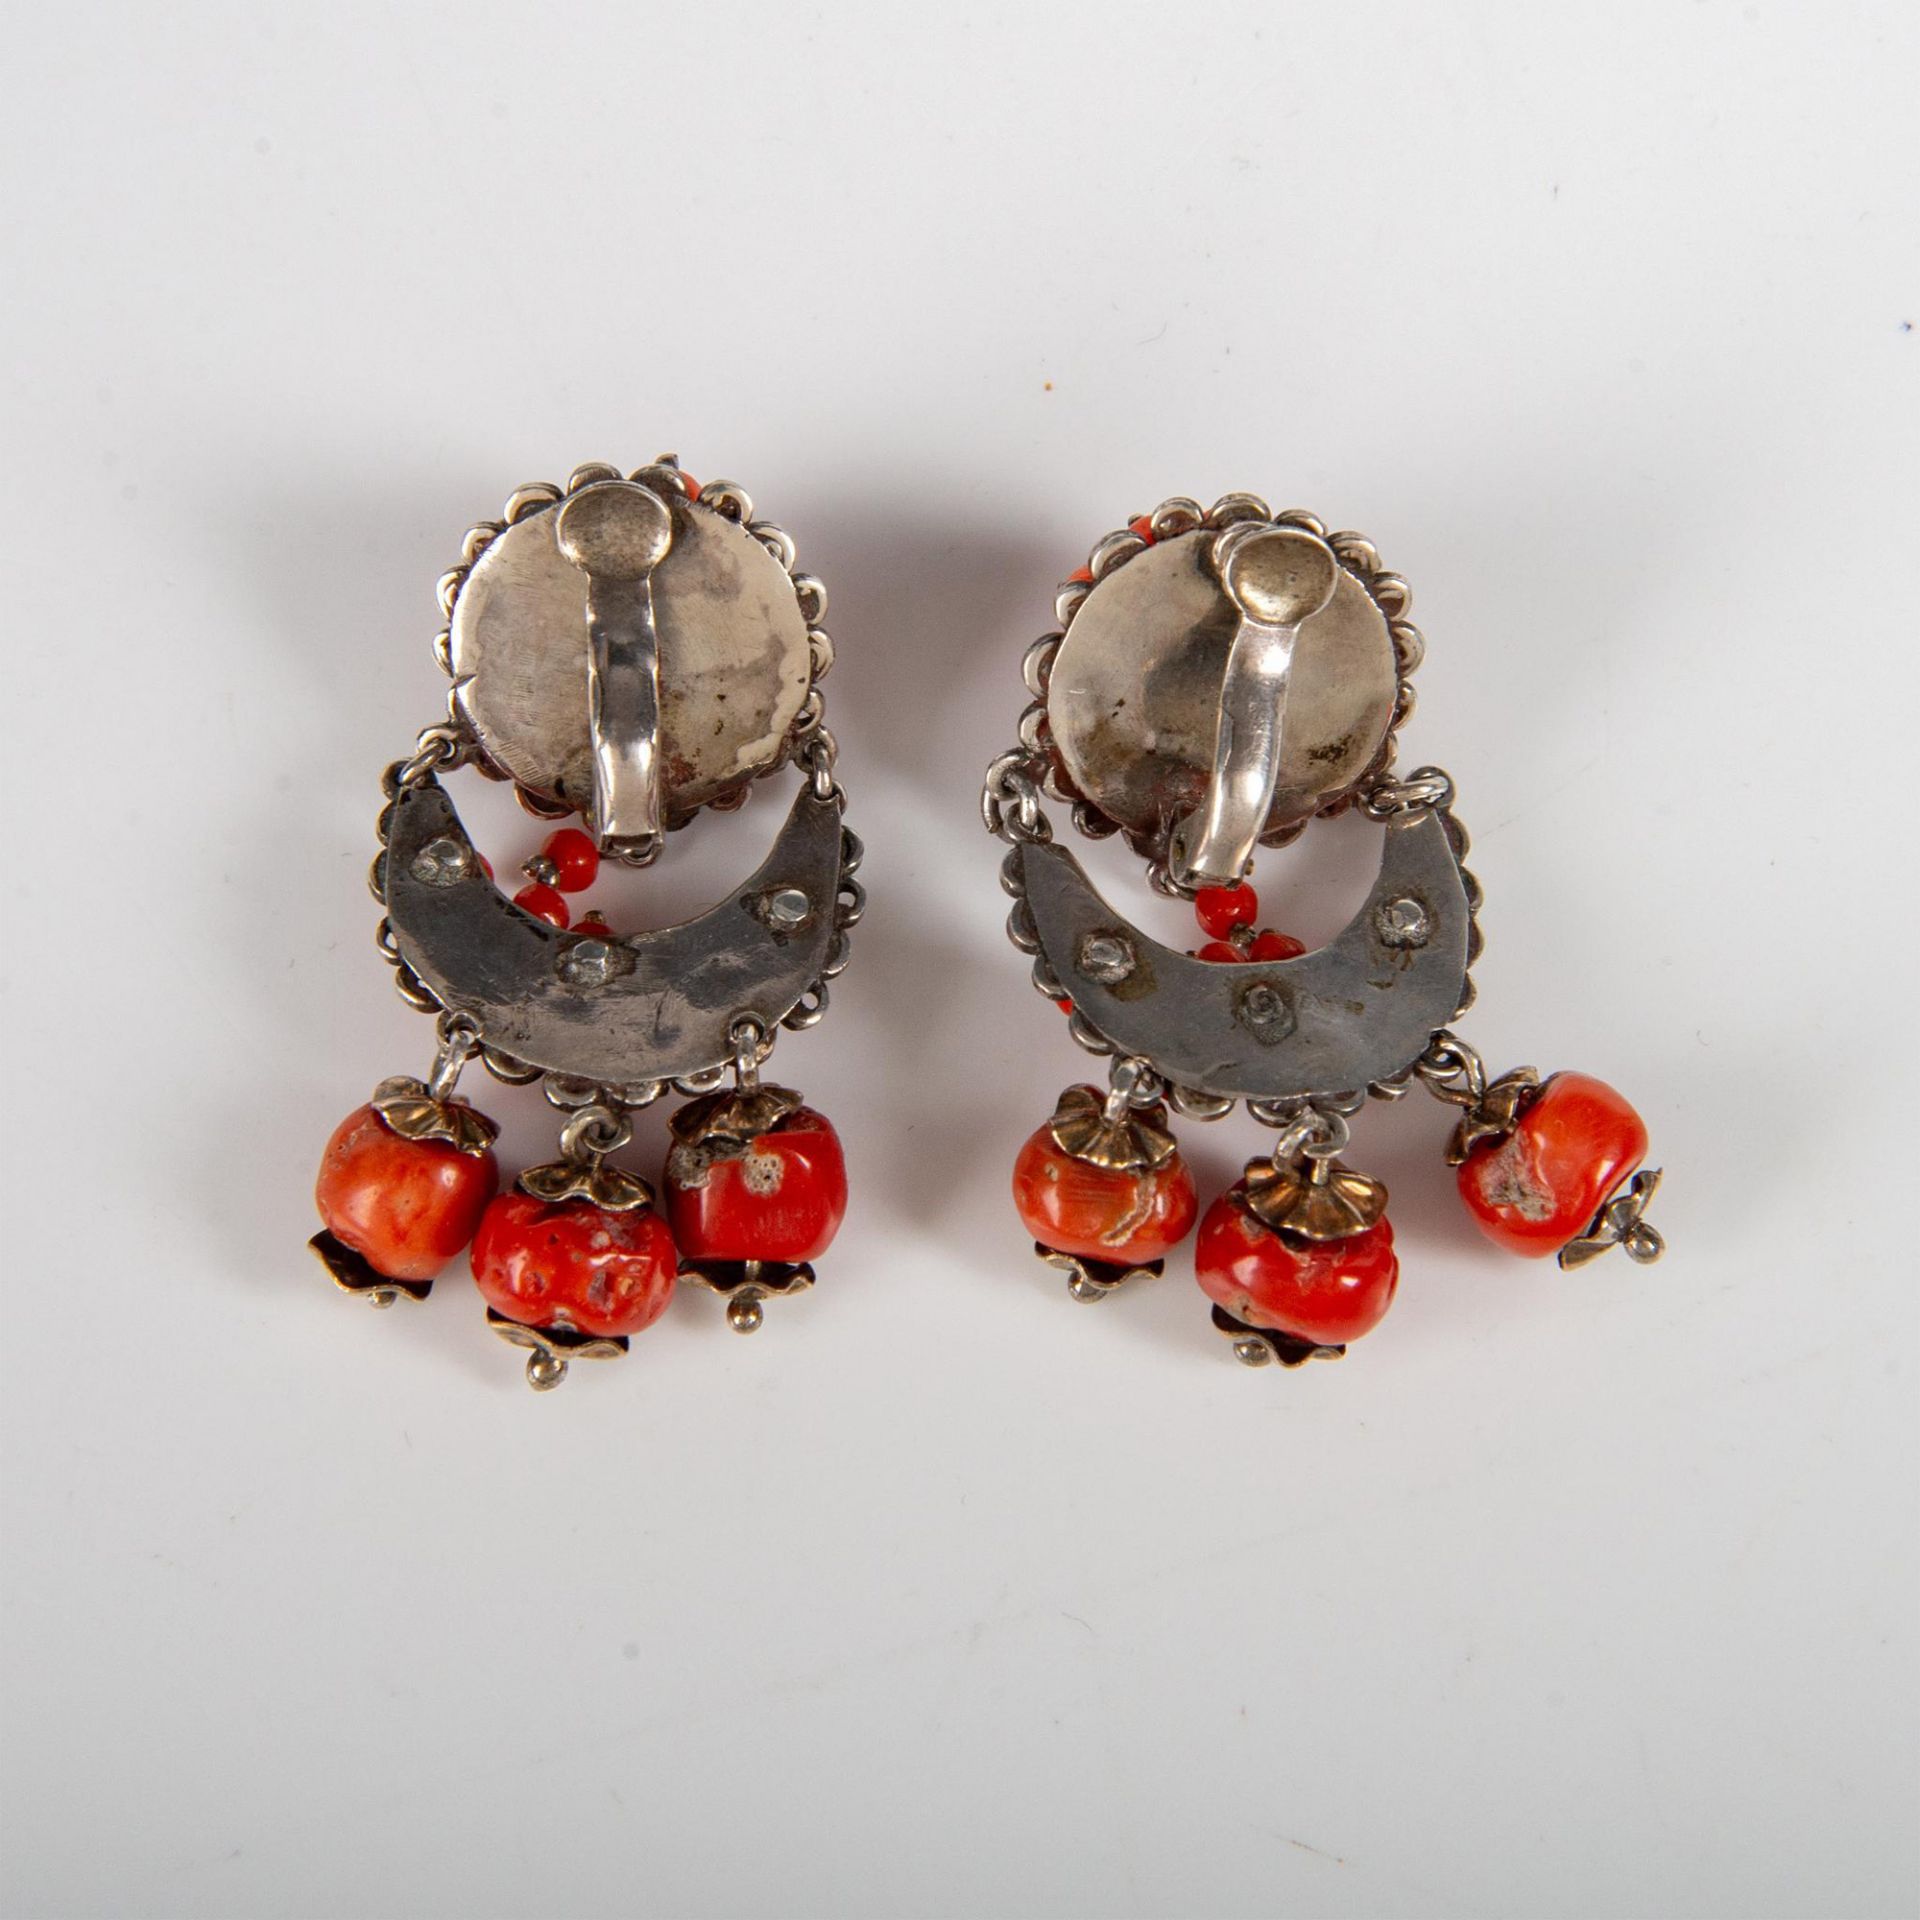 Pair of Silver and Chinese Coral Earrings - Image 4 of 6